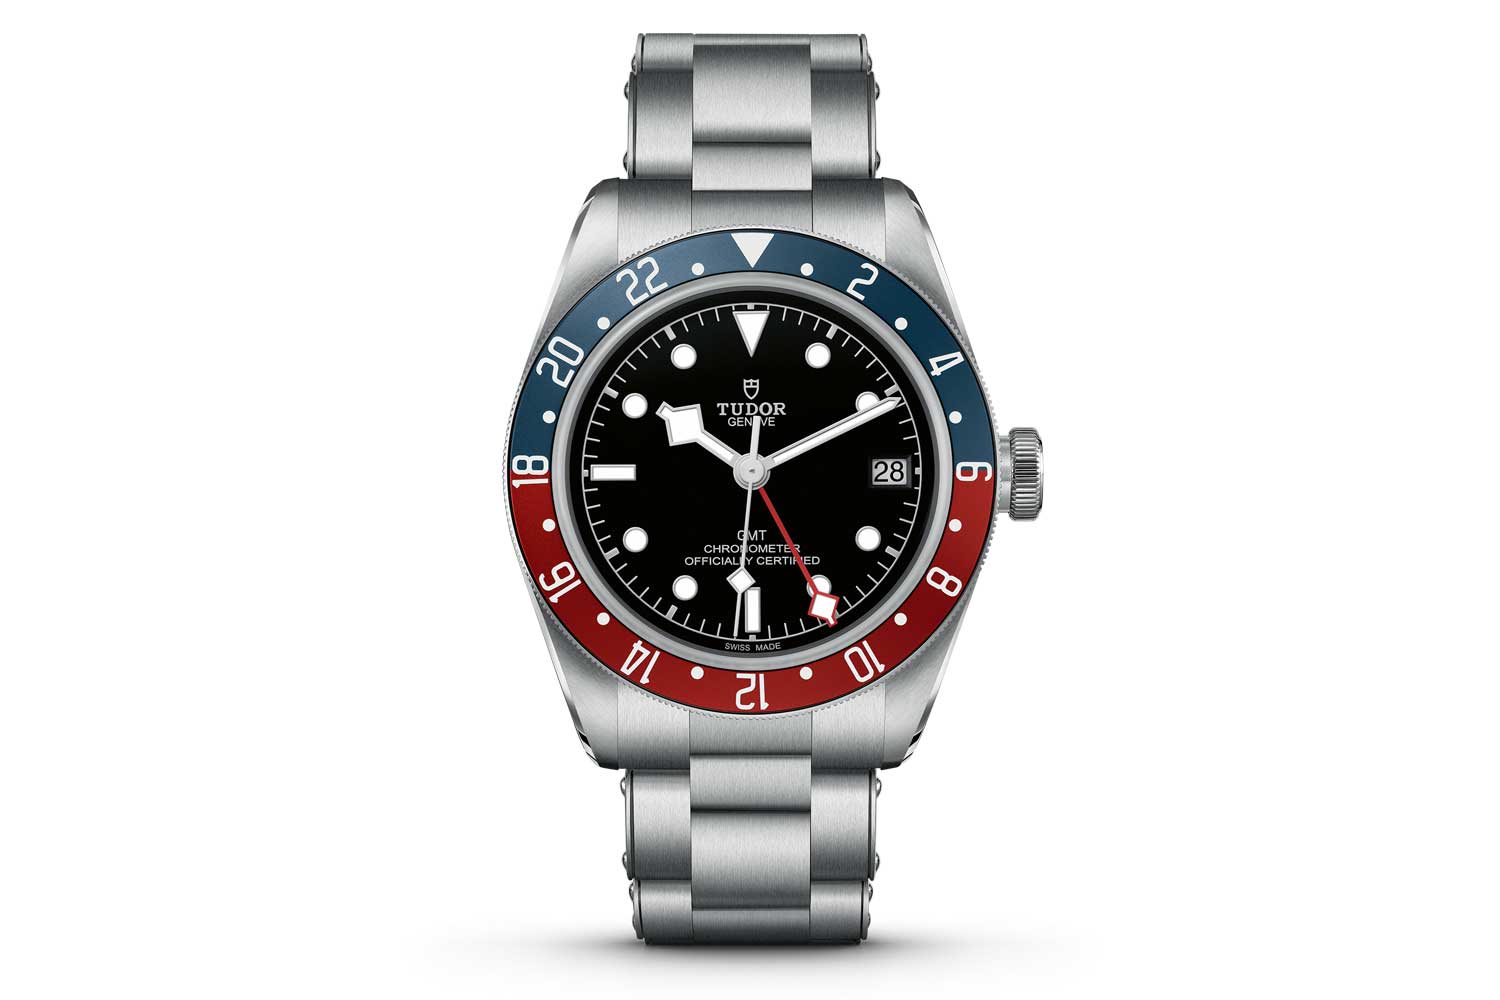 Tudor’s Black Bay GMT was launched in 2018 with the Rolex GMT- Master II — both watches featured the iconic bi-colored “Pepsi” bezel, albeit in different materials